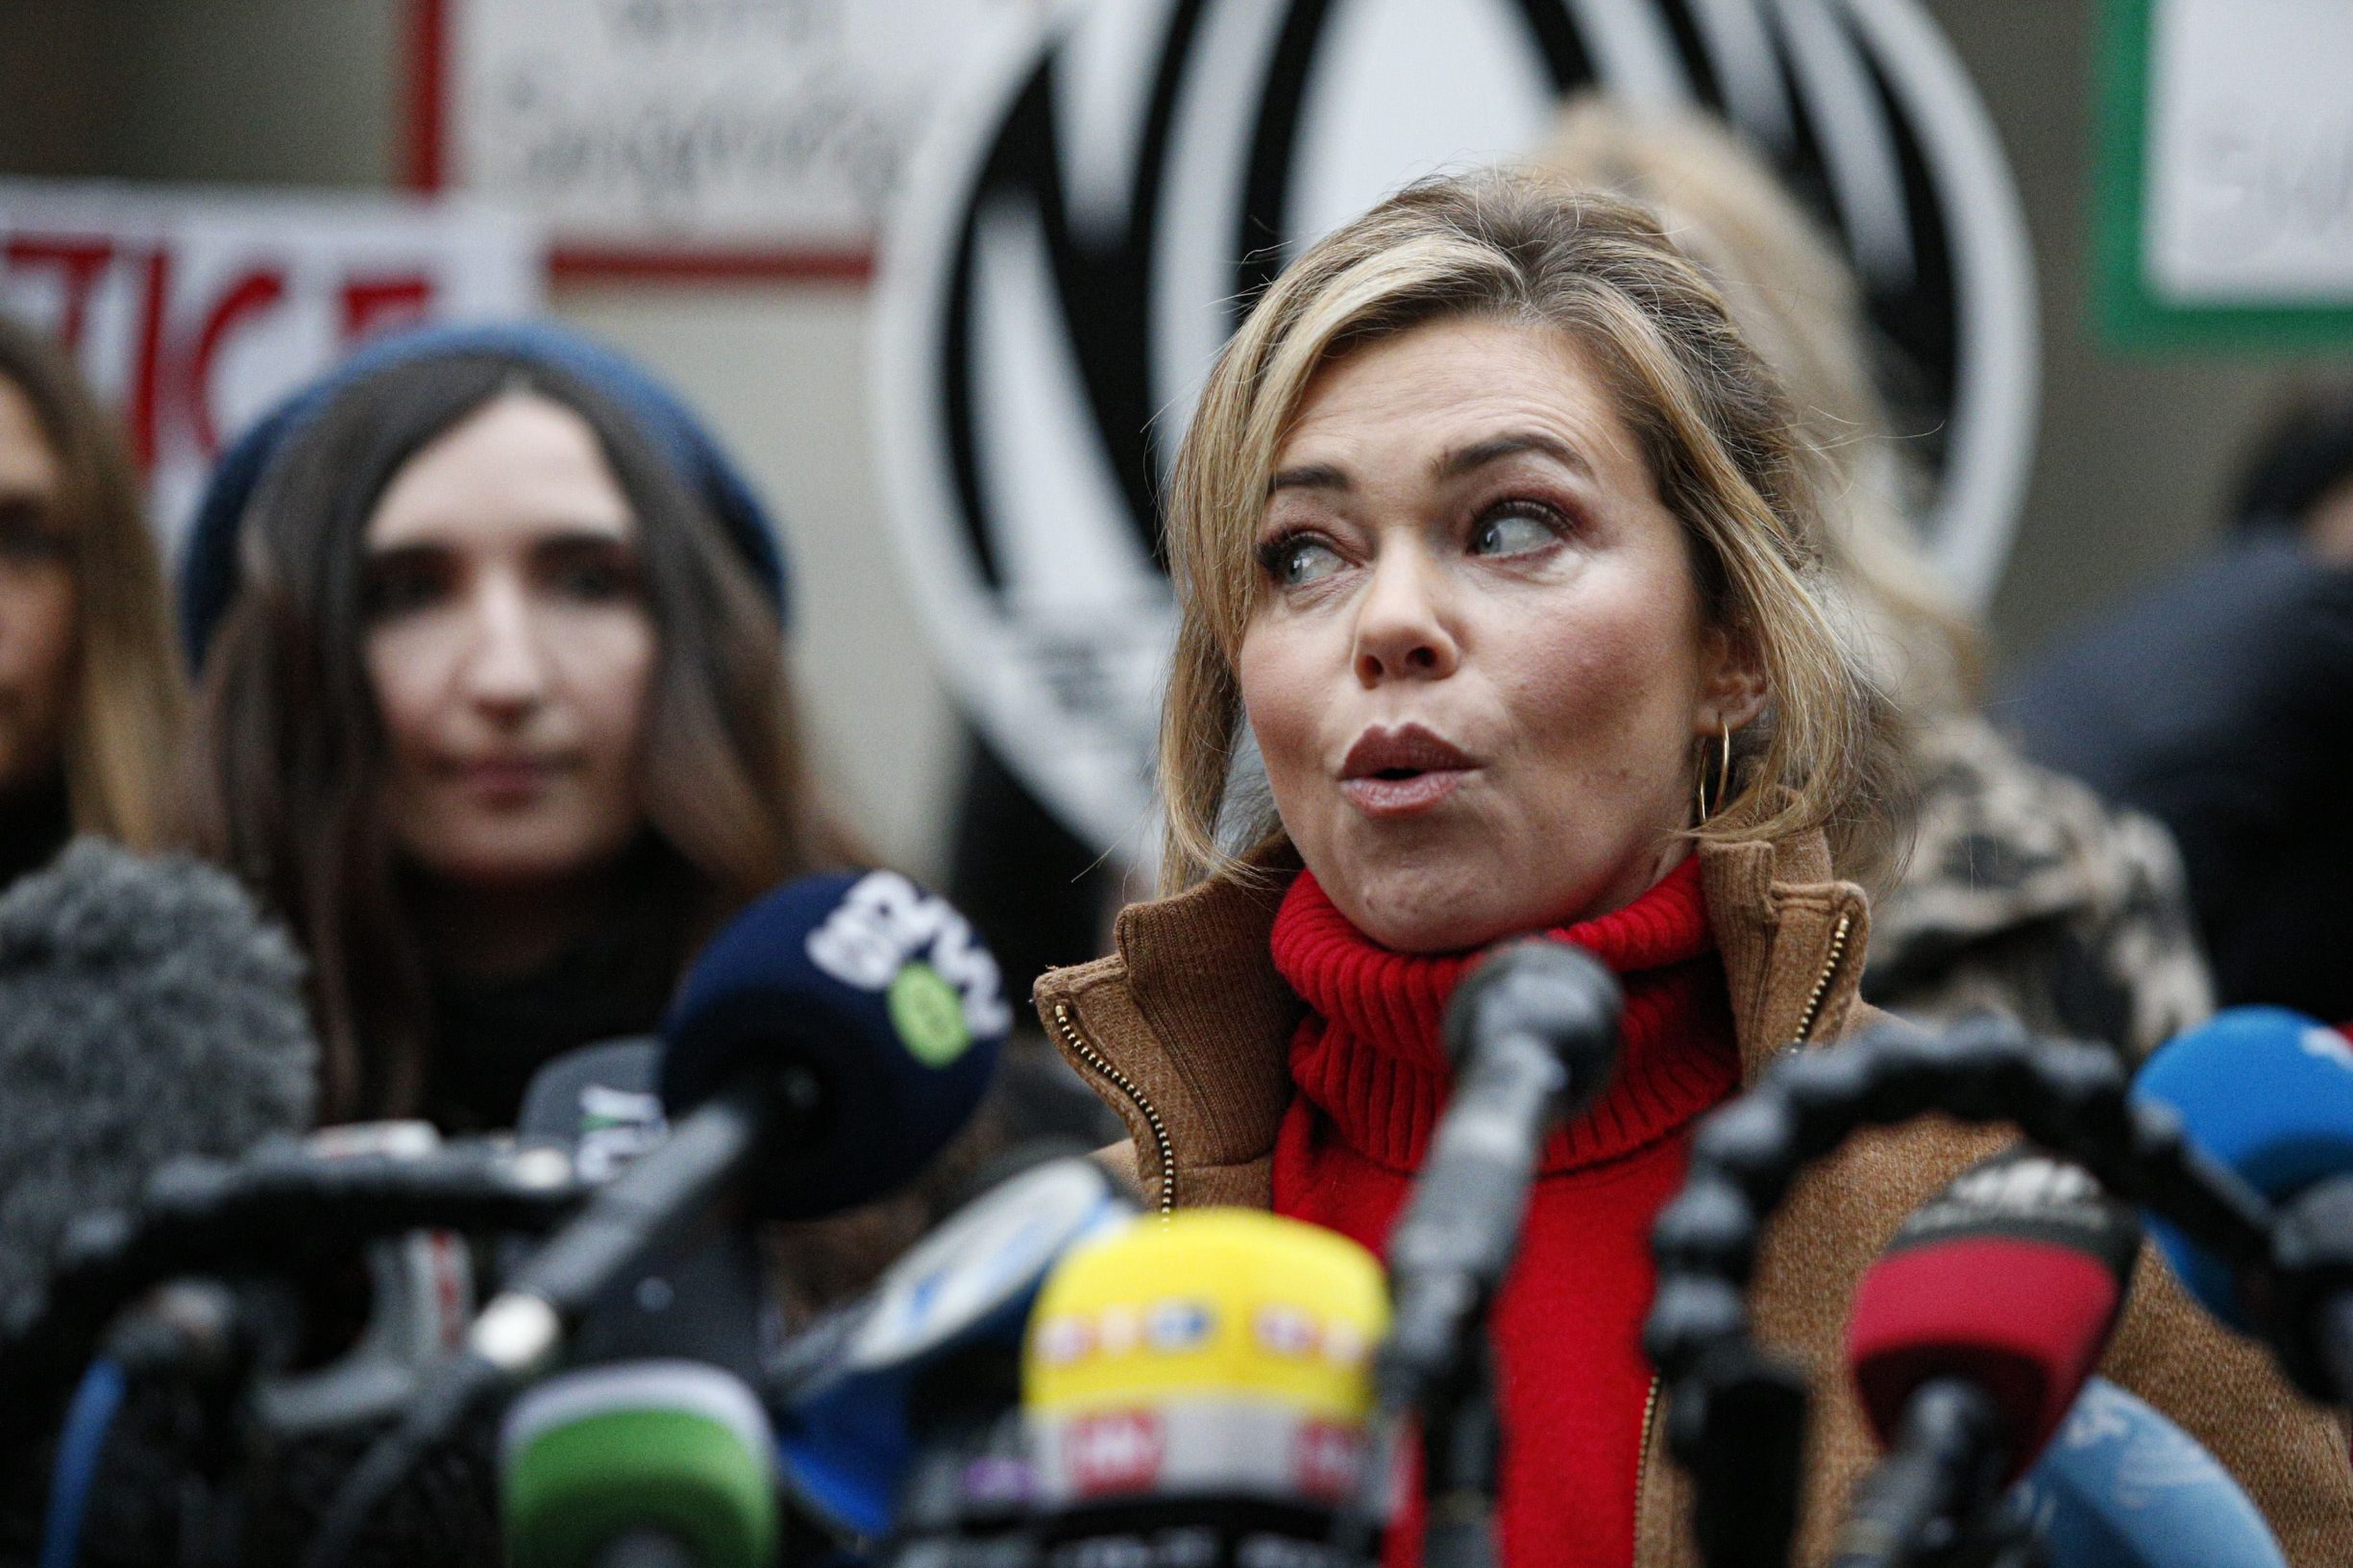 NEW YORK, NY - JANUARY 06: Reporter Lauren Sivan, who has accused Harvey Weinstein of sexual misconduct, speaks at a press conference outside the court on January 6, 2020 in New York City. Weinstein, a movie producer whose alleged sexual misconduct helped spark the #MeToo movement, pleaded not-guilty on five counts of rape and sexual assault against two unnamed women and faces a possible life sentence in prison.   Kena Betancur/Getty Images/AFP
== FOR NEWSPAPERS, INTERNET, TELCOS & TELEVISION USE ONLY ==